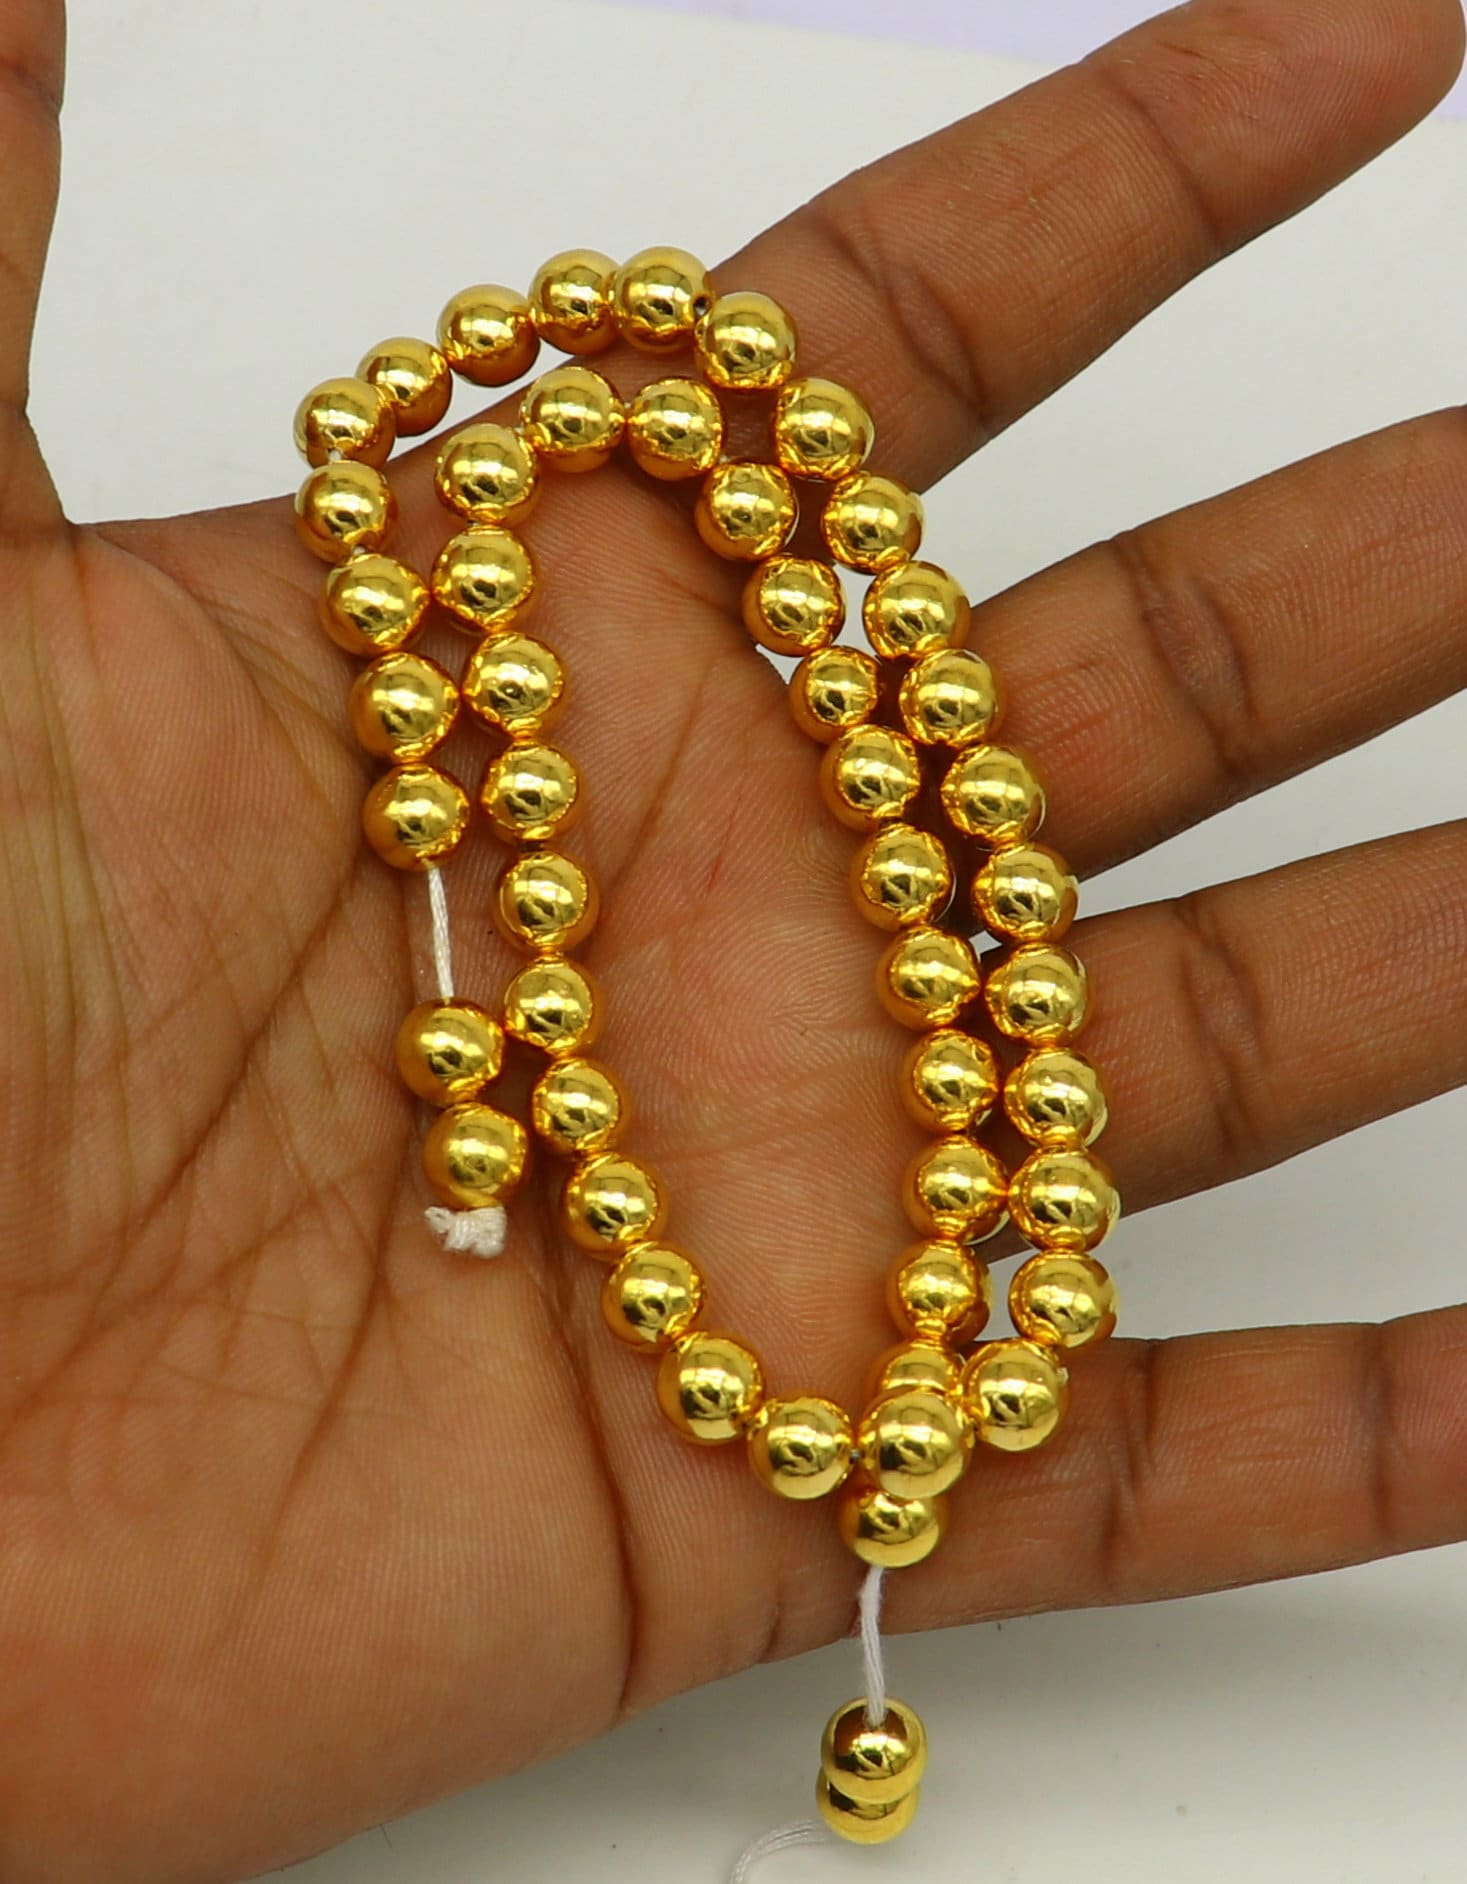 10 pieces 22kt yellow gold handmade 7 mm beads, loose beads, jewelry findings for customize jewelry, excellent wax beads findings BD029 - TRIBAL ORNAMENTS